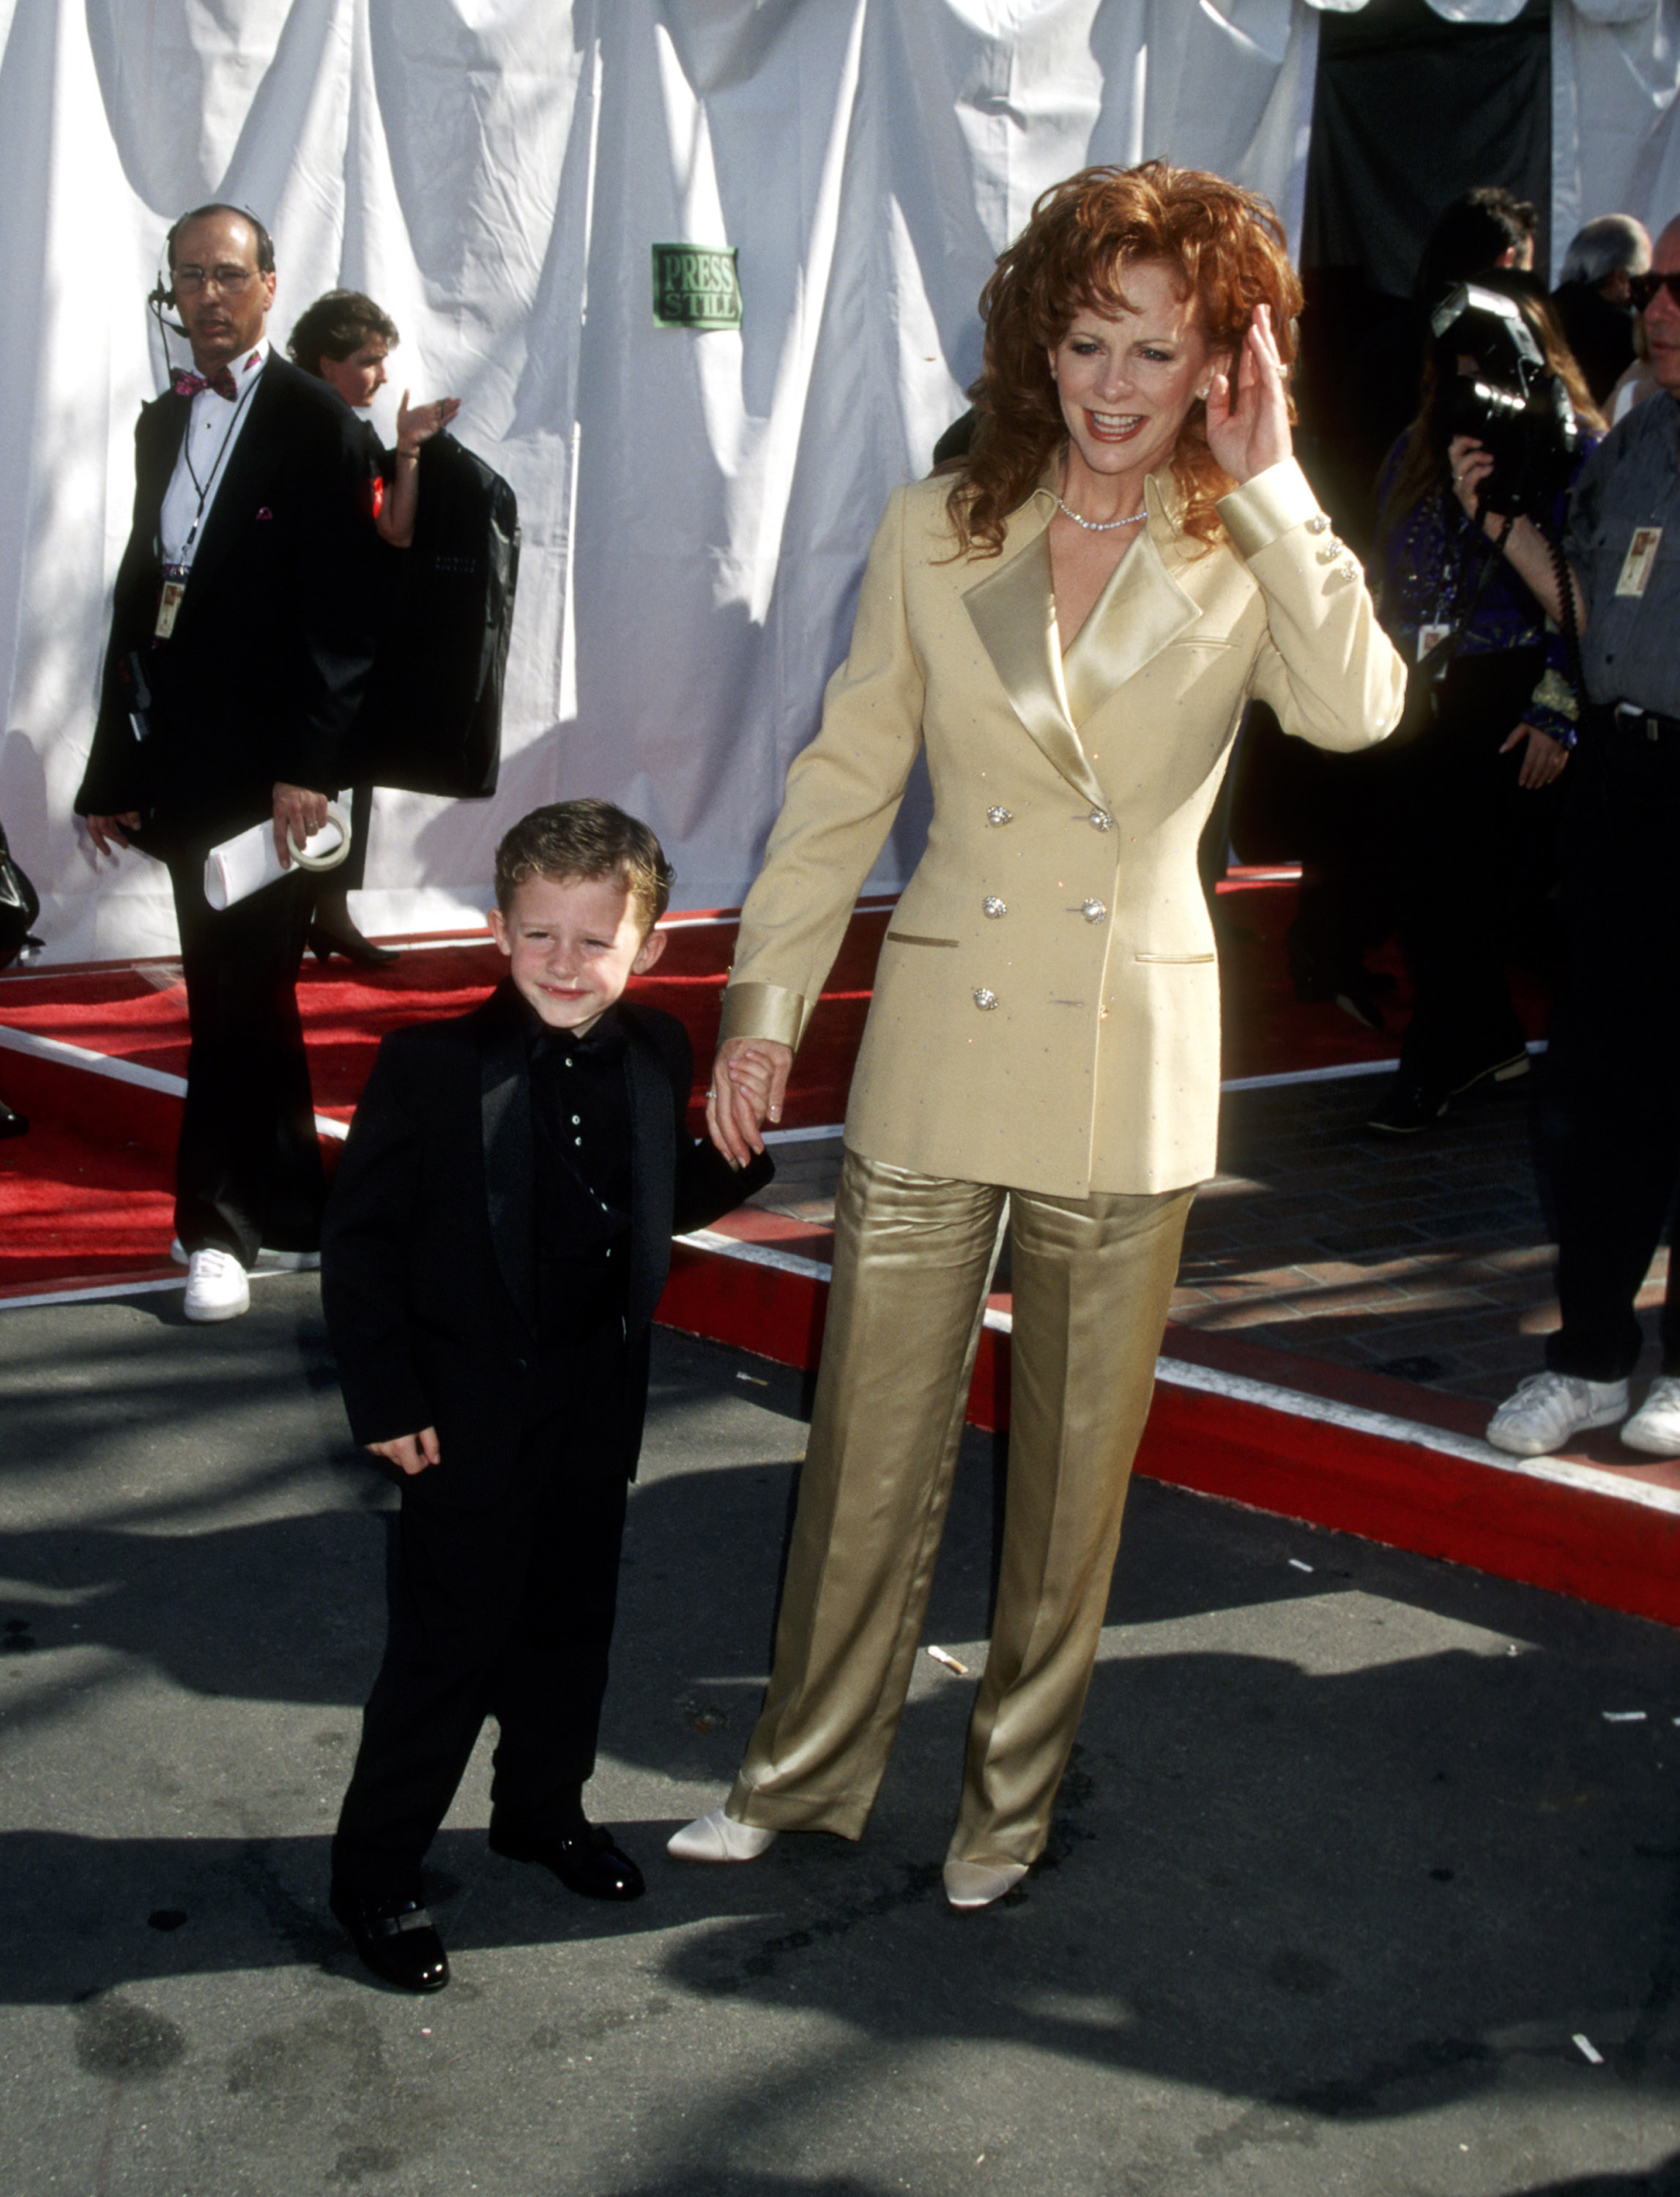 Reba McEntire and Shelby Blackstock at the 31st Annual Academy of Country Music Awards in 1996 | Source: Getty Images